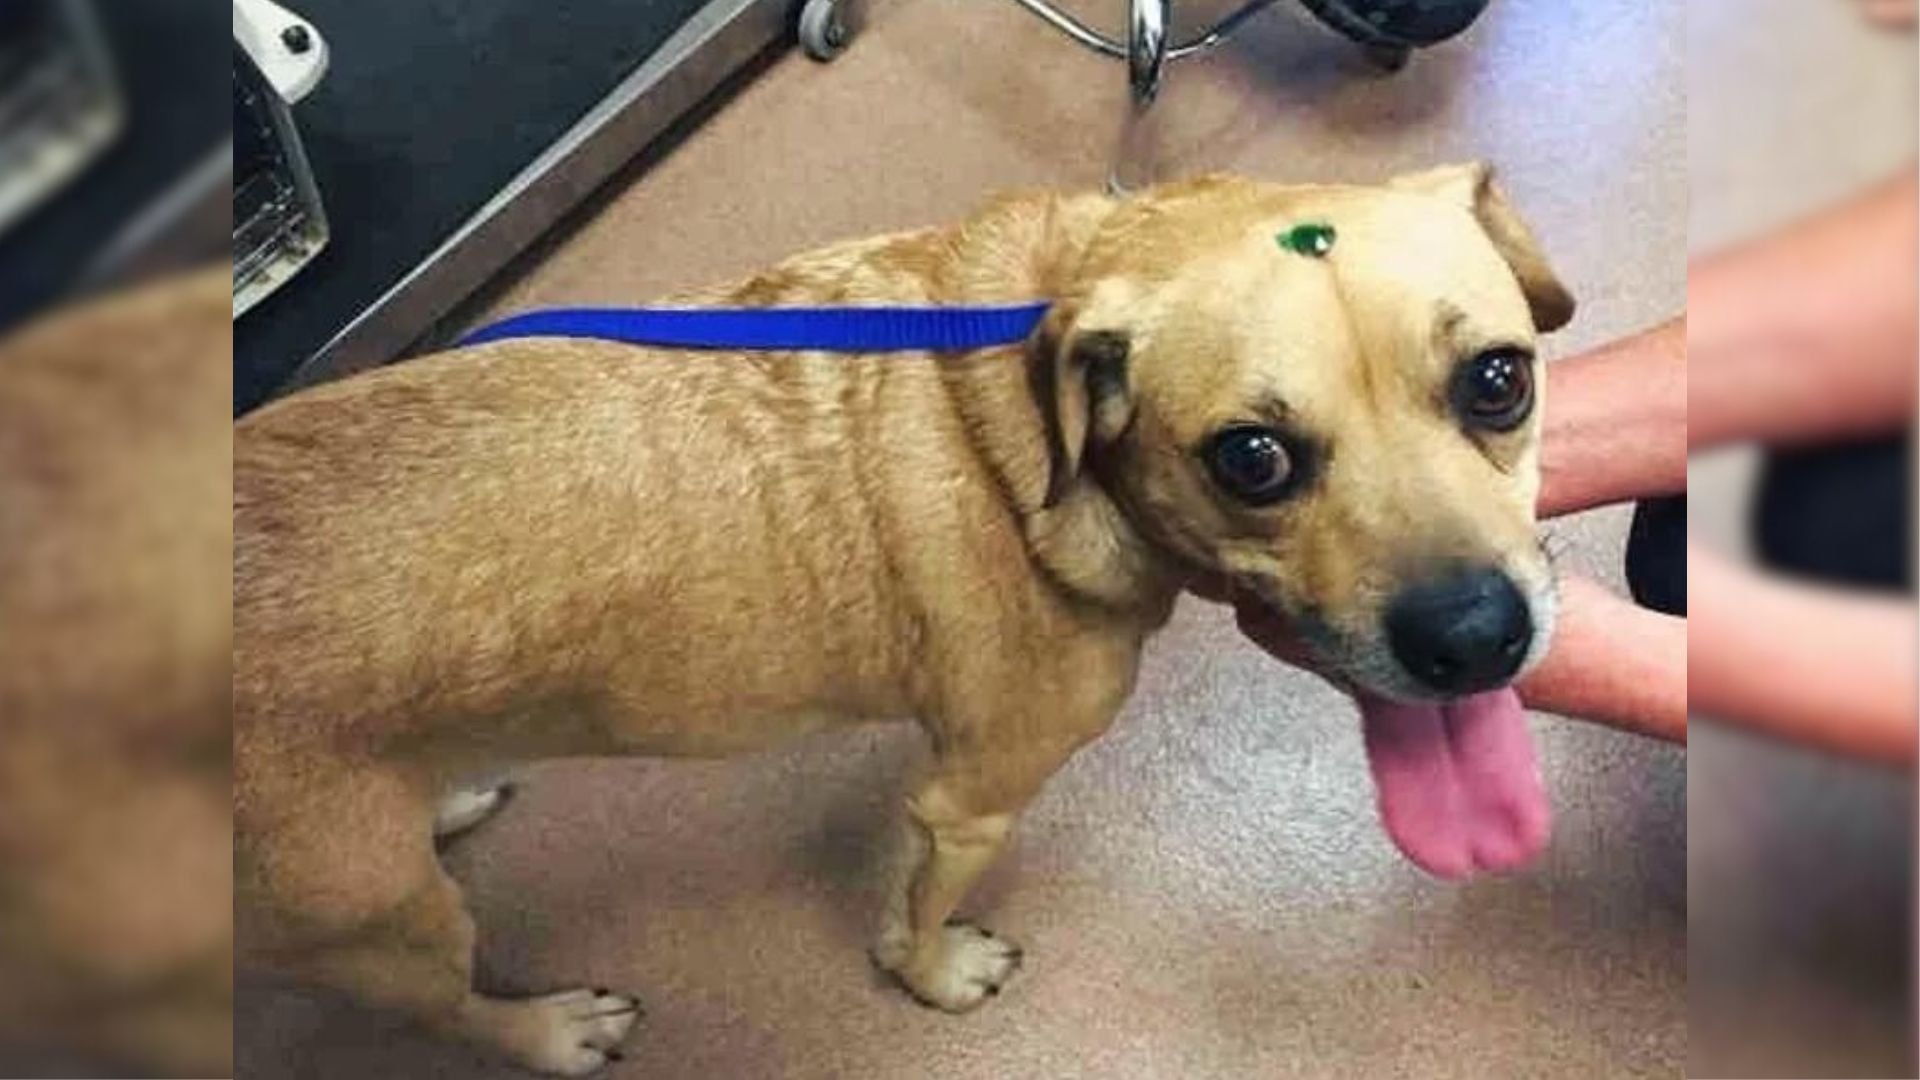 Rescuers Who Saved 2 Adorable Stray Dogs Noticed Something Strange On Their Heads